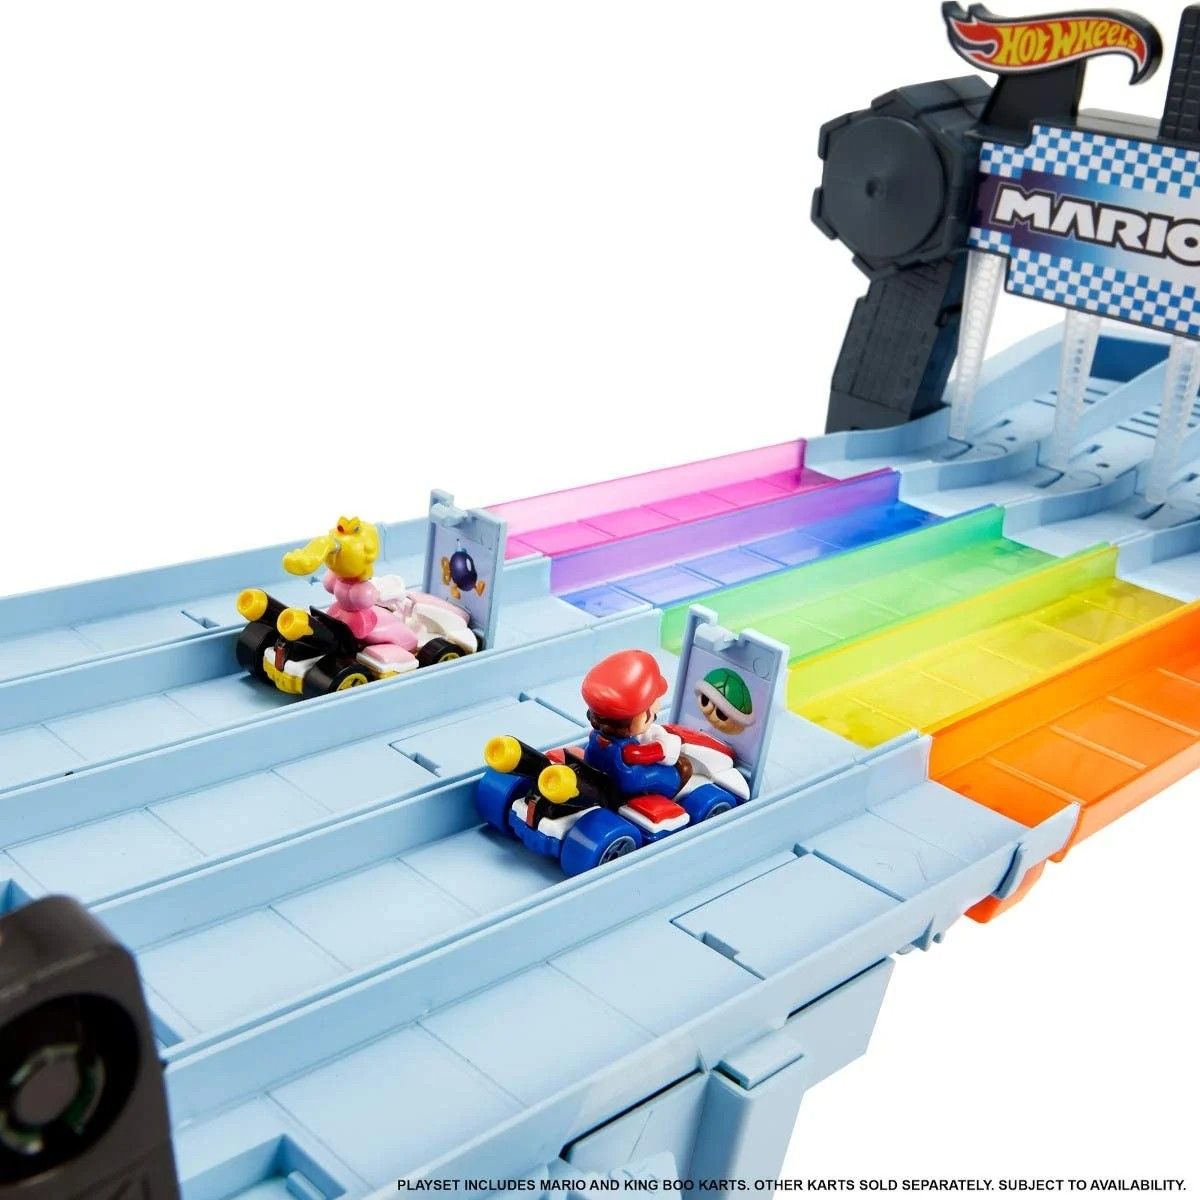 Mario Karts Rainbow Road Comes To Life With Hot Wheels Track [UPDATED]